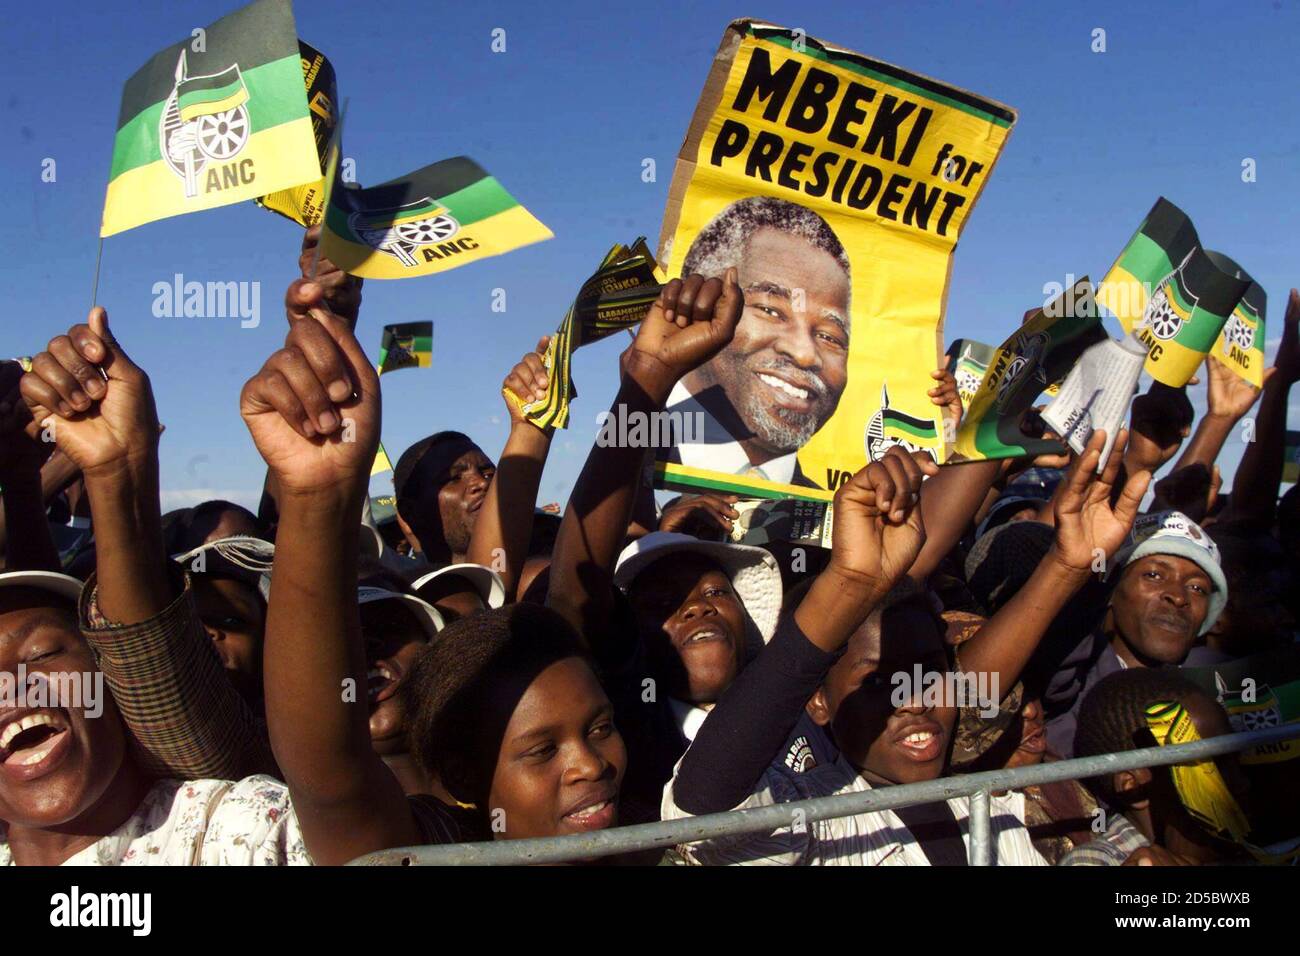 ANC supporters wave to the deputy President Thabo Mbeki during an election campaign rally in a township in Nelspruit May 23. Mbeki, due to succeed retiring president [Nelson Mandela], vowed to fight corruption by government officials in his administration if he is made president. The ANC is expected to win the election overwhelmingly. Stock Photo